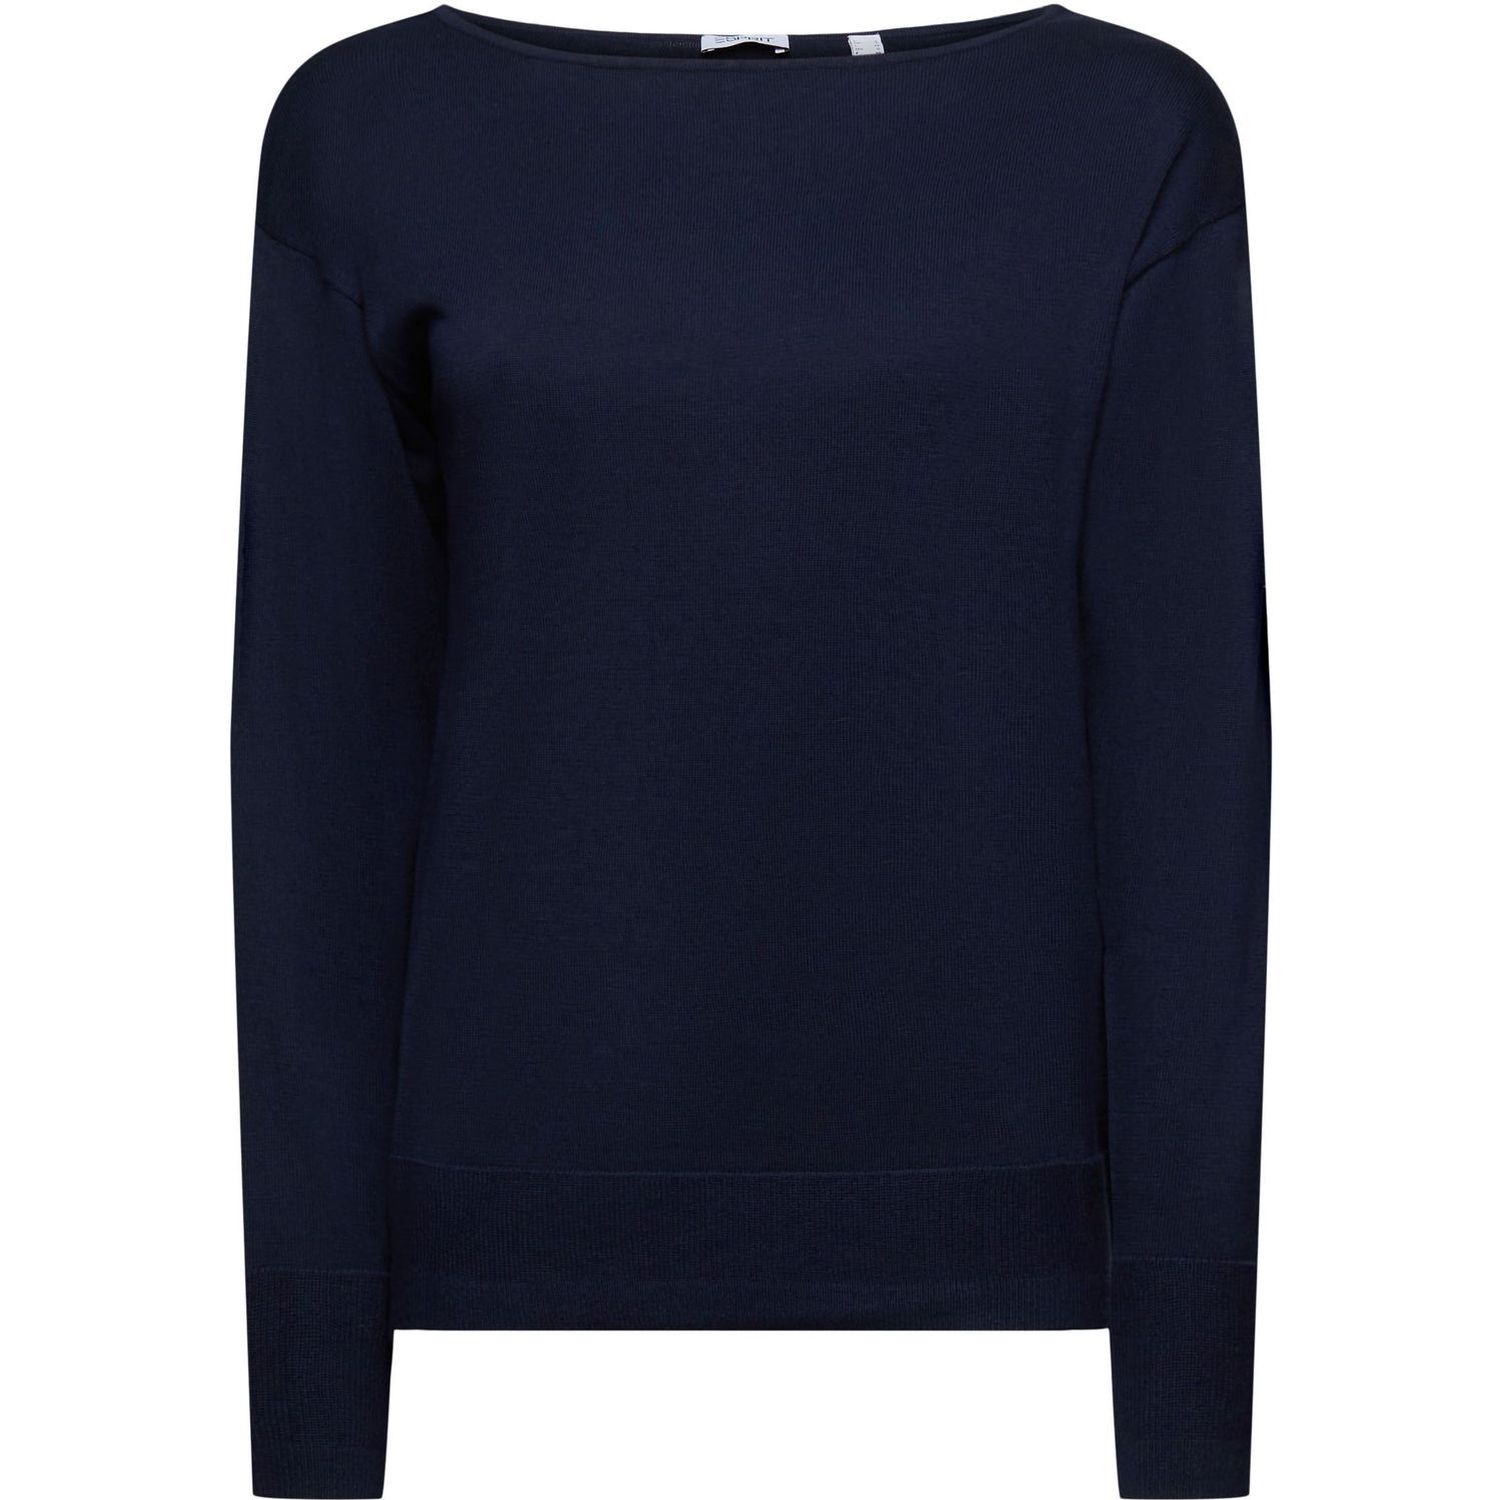 CO boatneck sweater